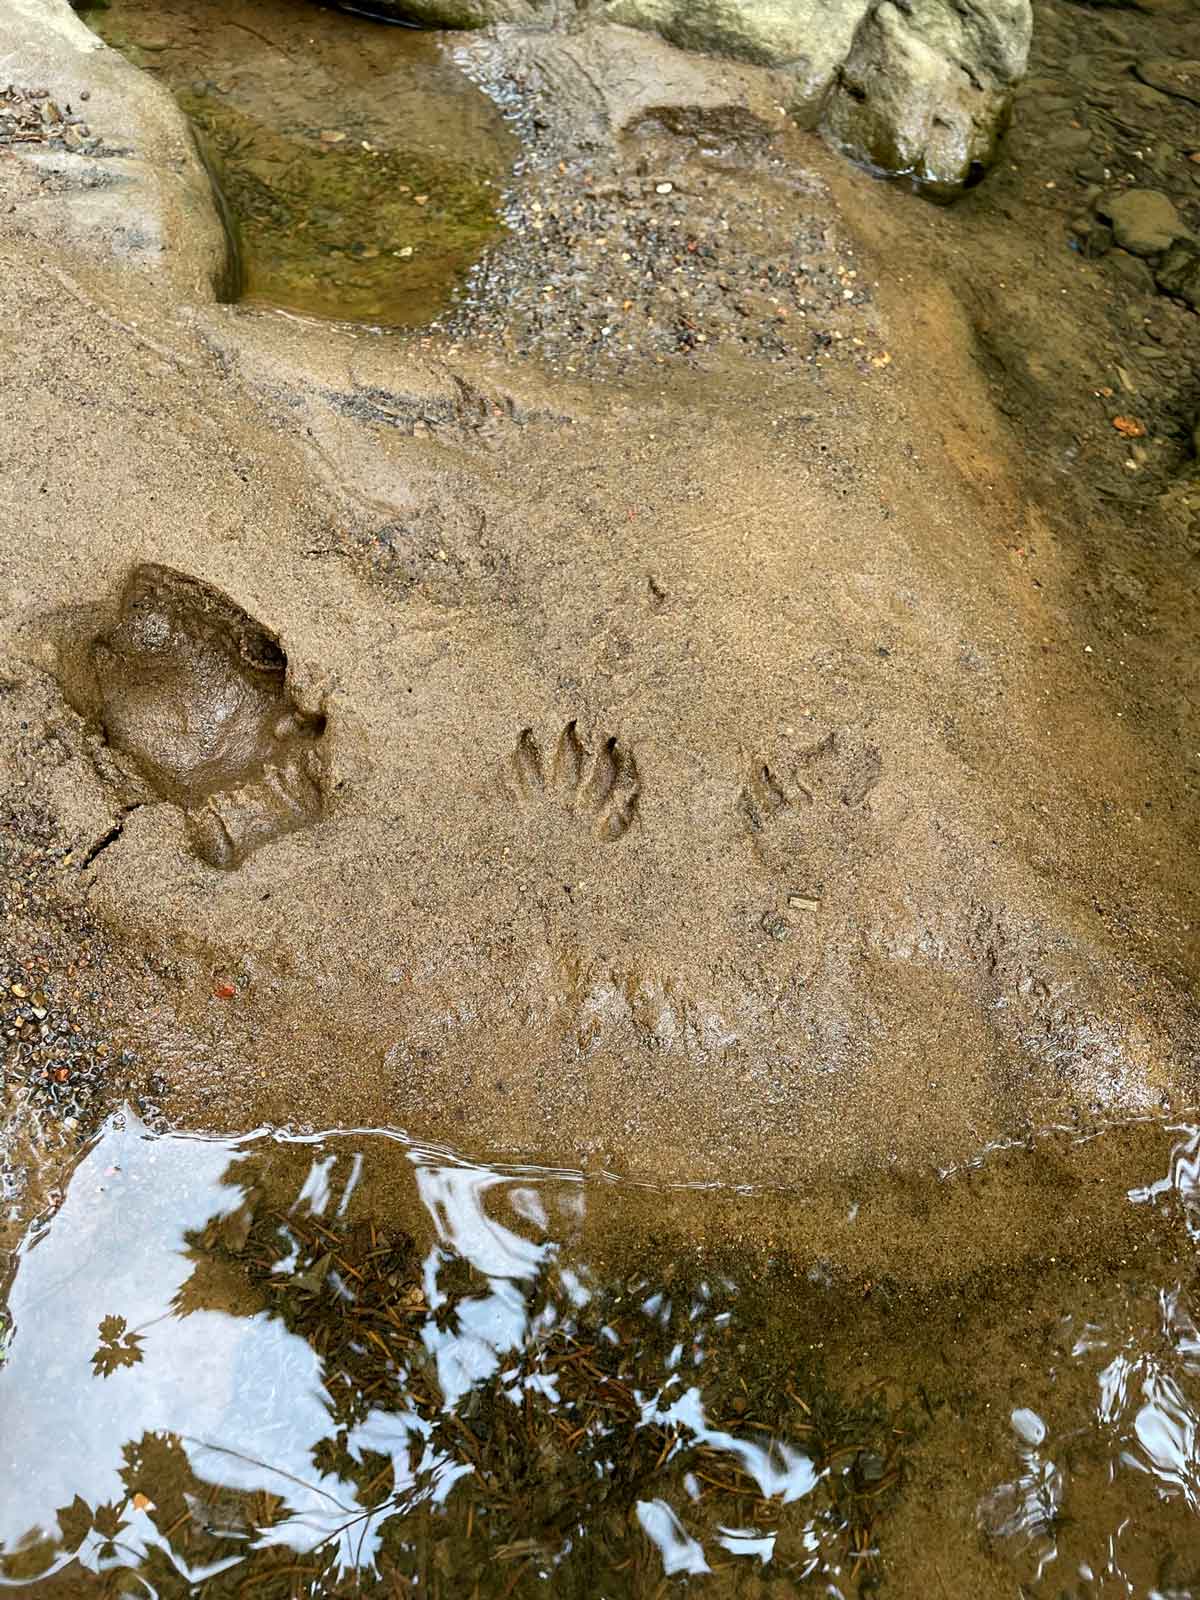 Footprints of others at the watering hole.